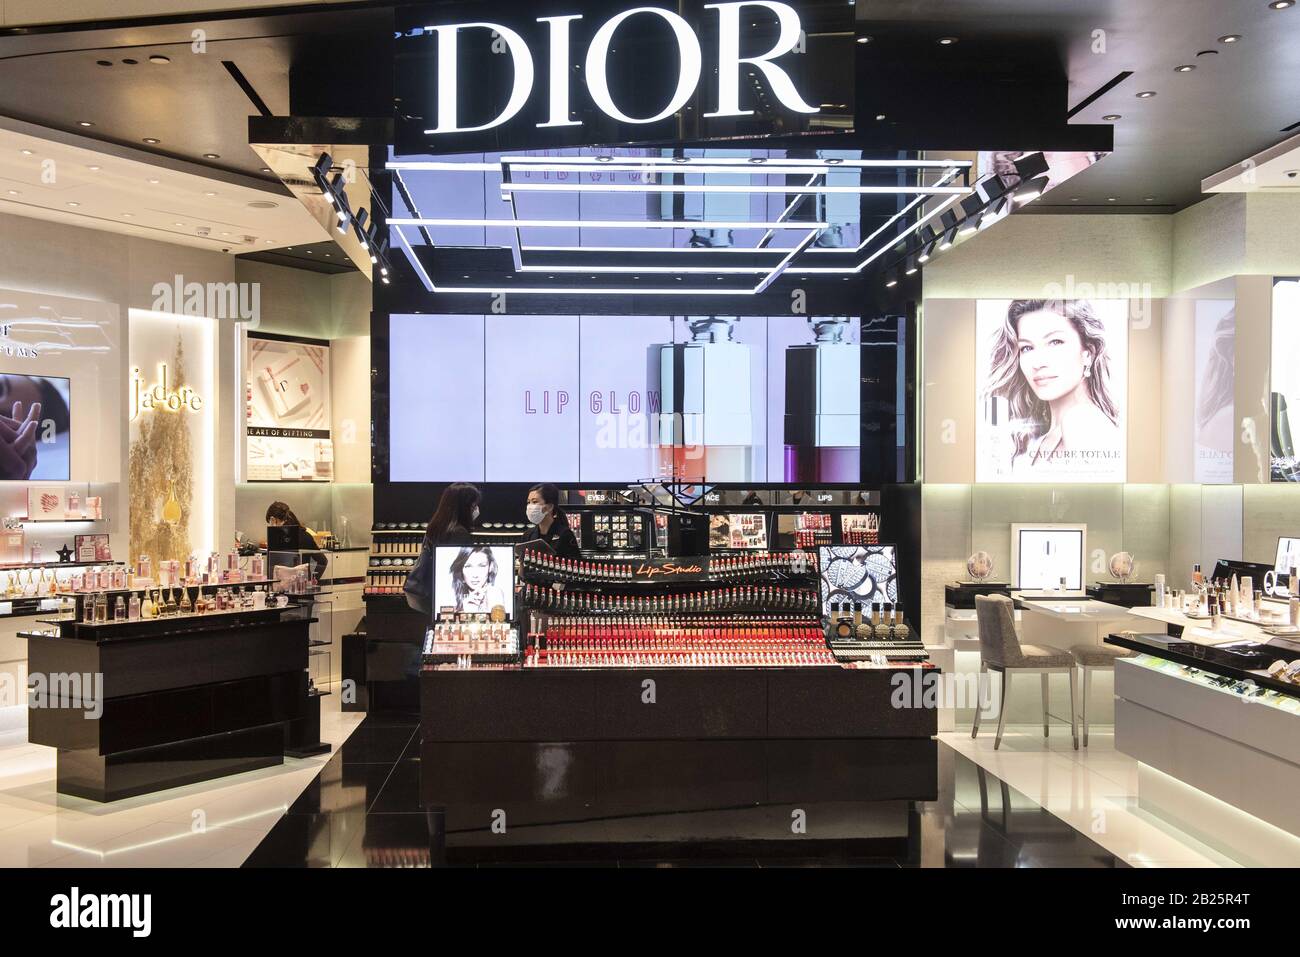 christian dior beauty products